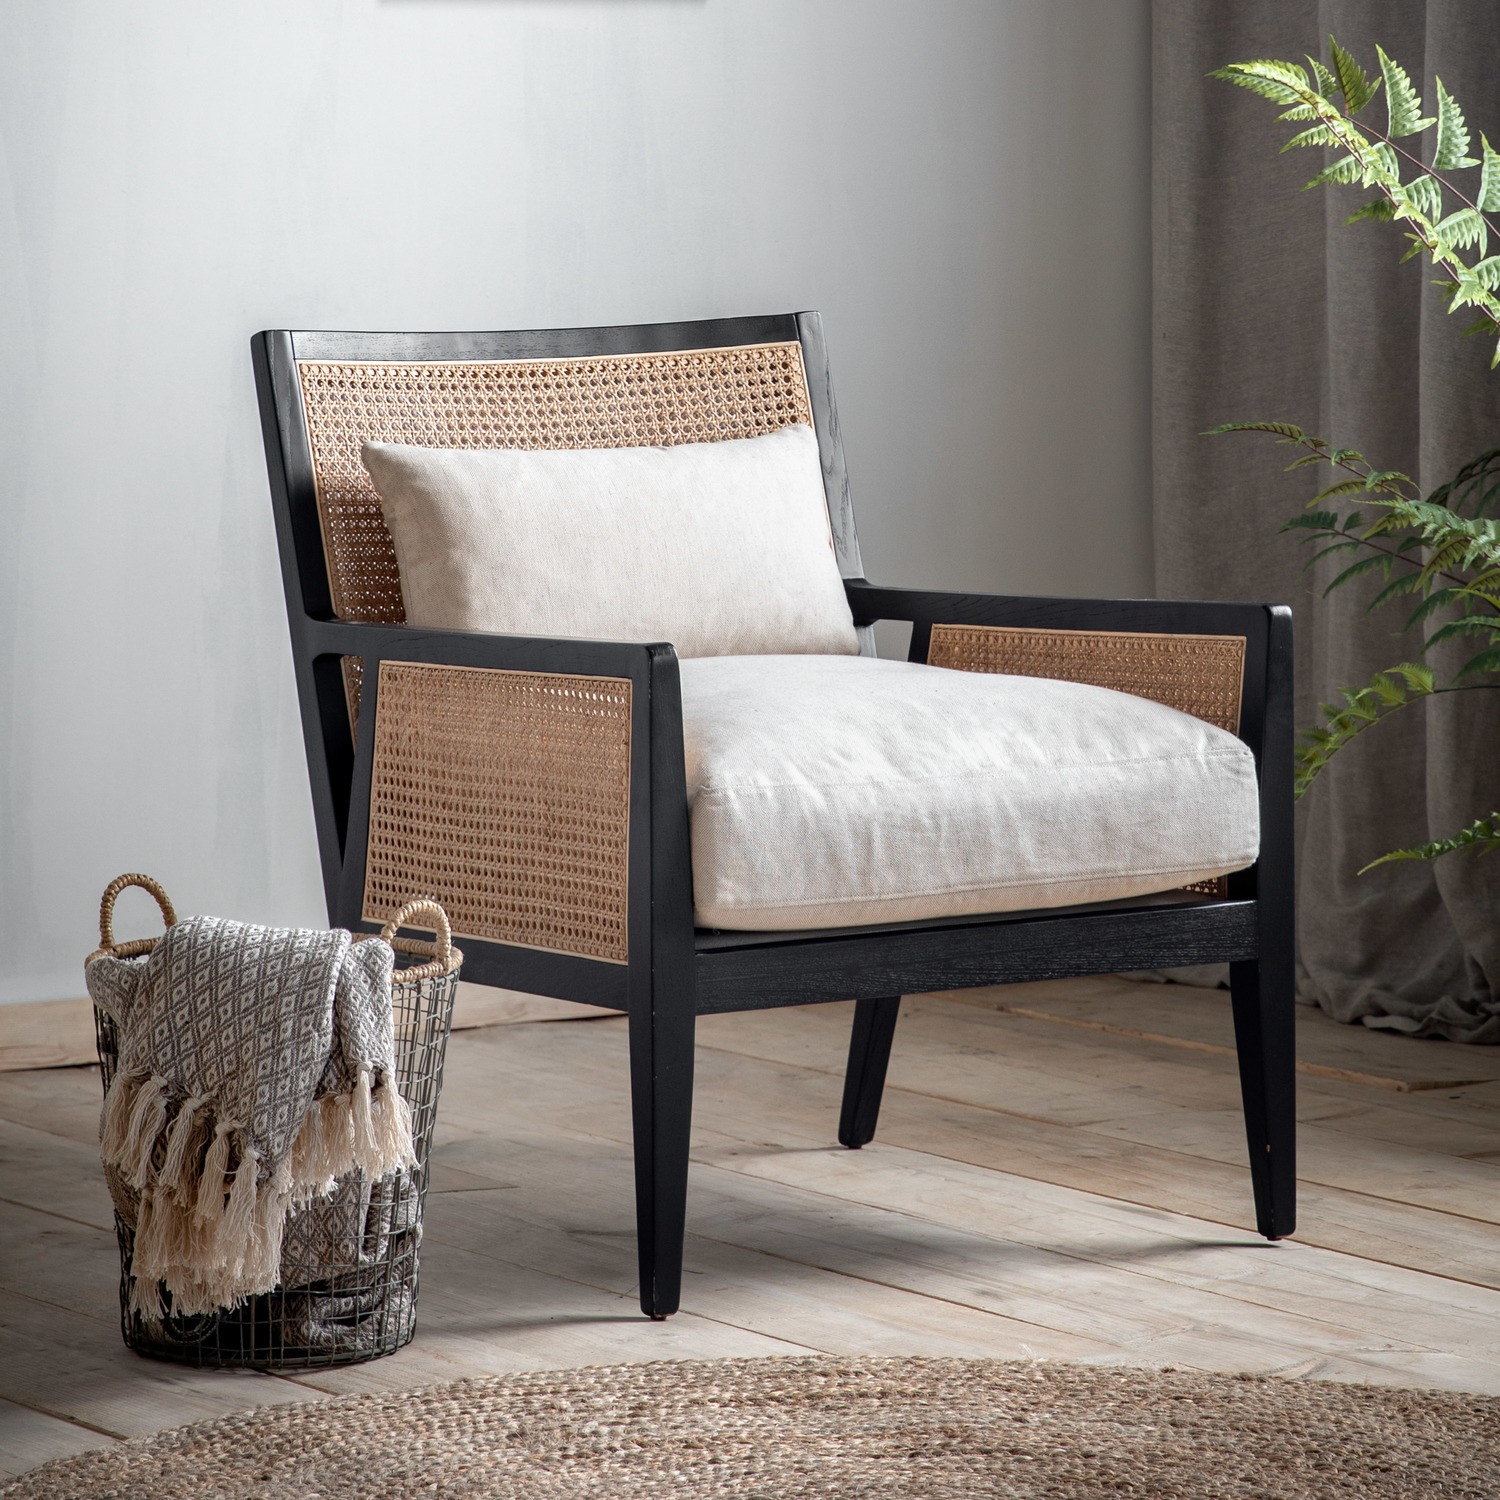 Photo of Cream rattan chair with cushions and black wood frame - caspian house